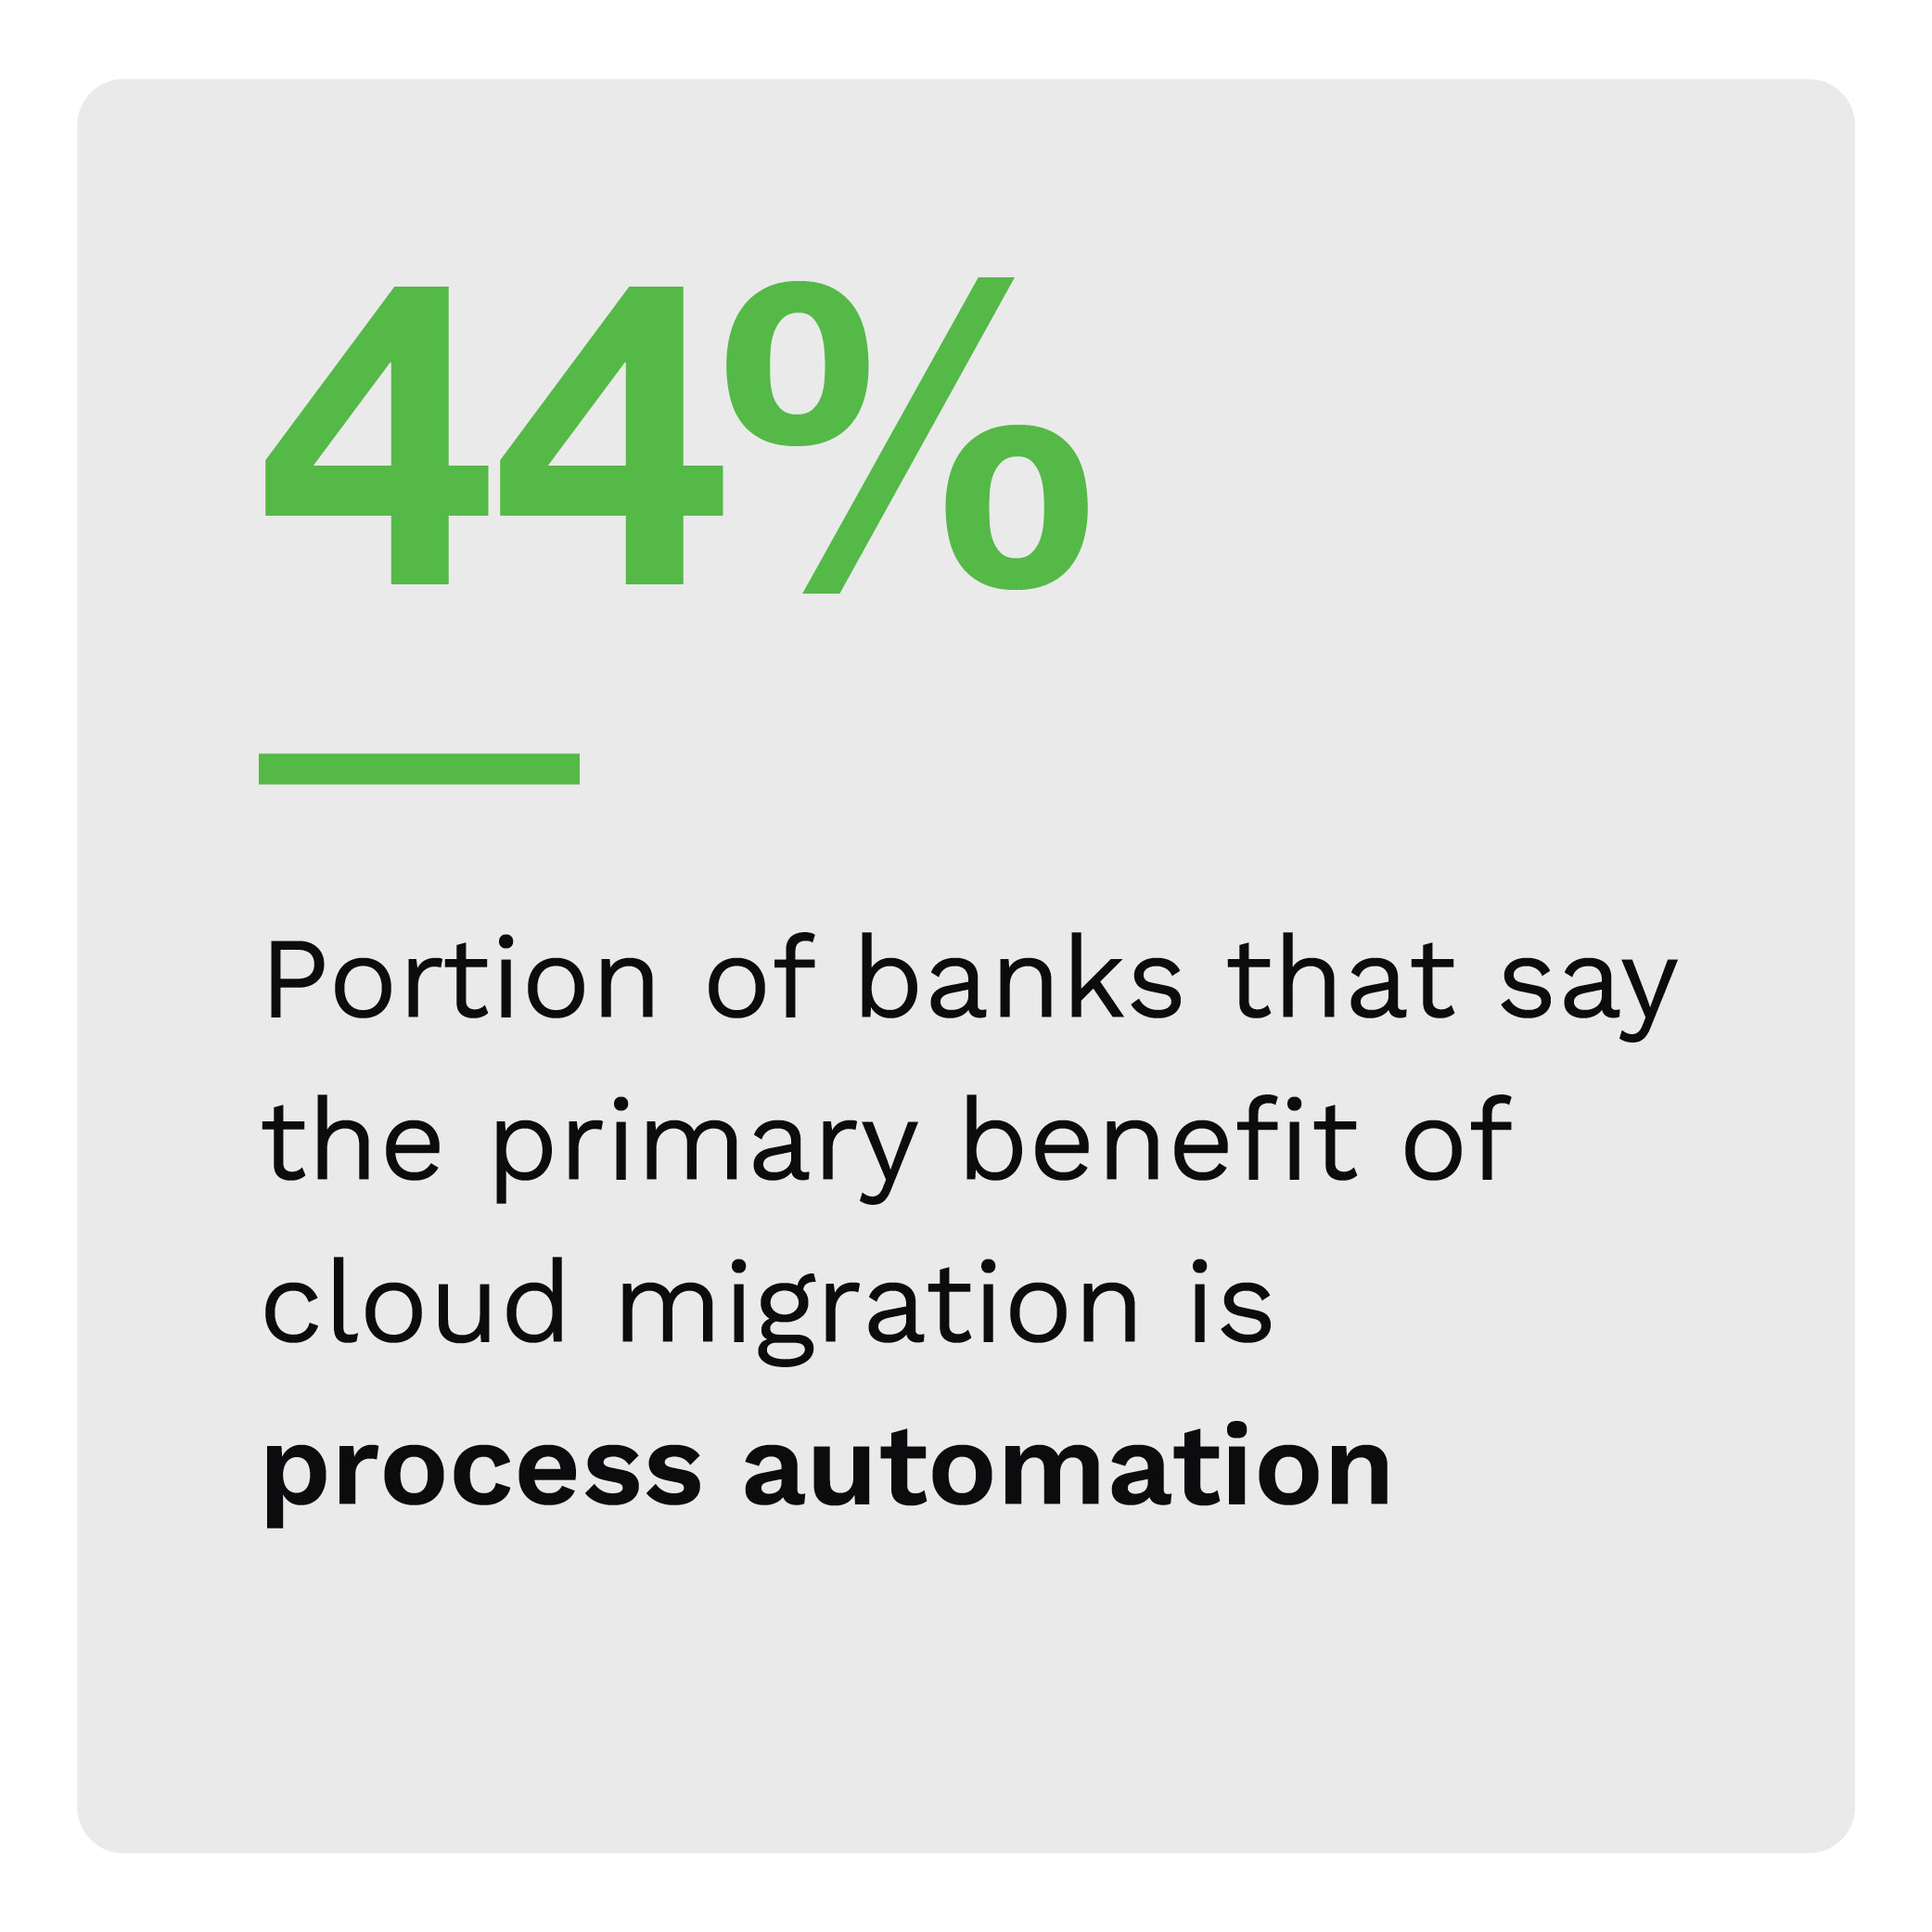 44%: Portion of banks that say the primary benefit of cloud migration is process automation